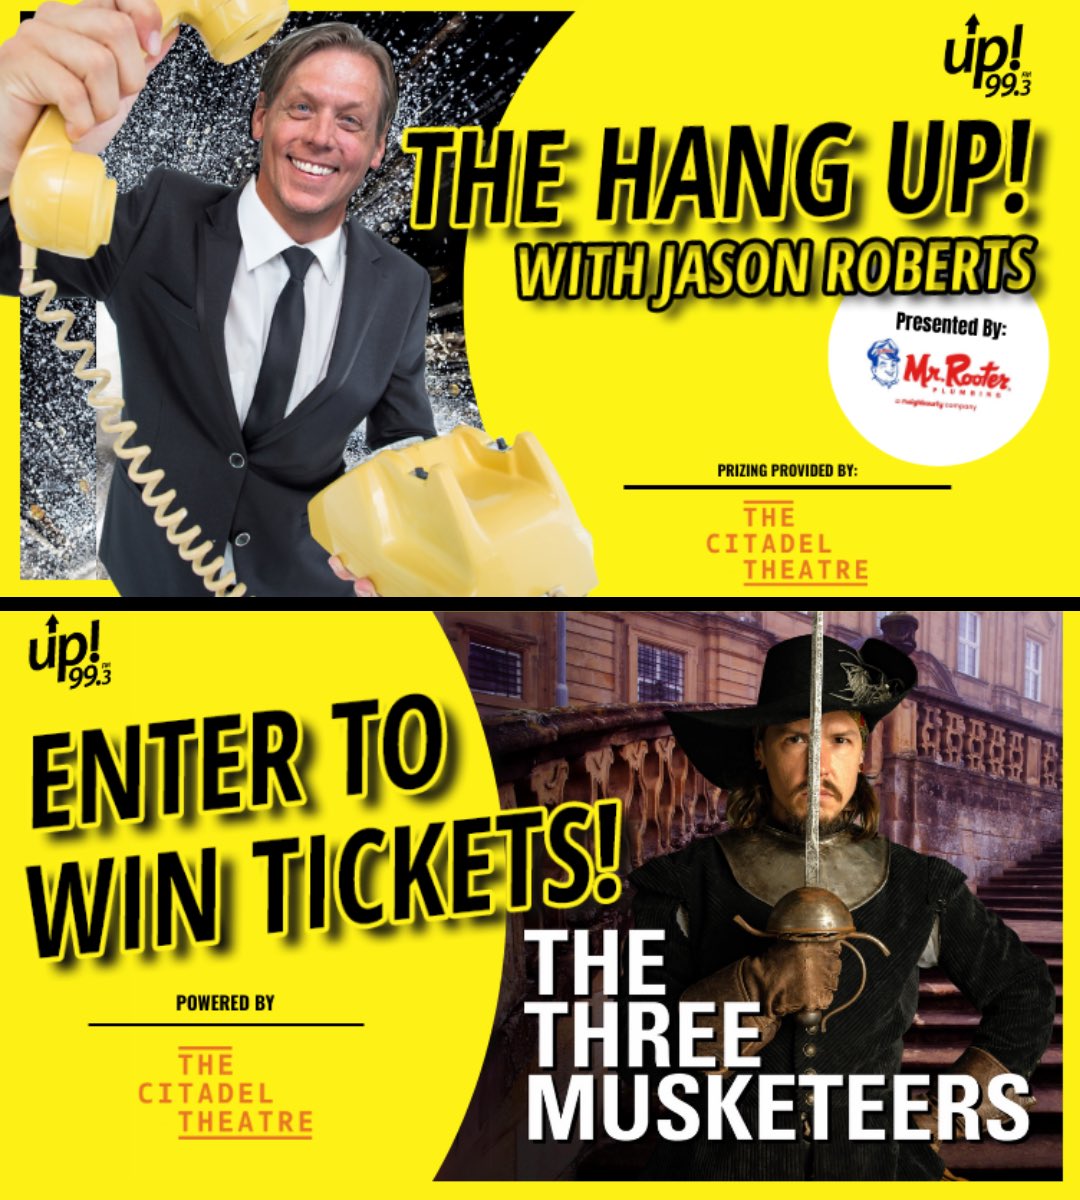 We’ve got two ways to win your way in to The Citadel Theatre’s The Three Musketeers - 1.)Be the last one standing on this week’s run of The Hang Up! with Jason Roberts, weekdays at 4:15pm and you’ll win a pair of show tickets. 2.)Double your chances at winning and enter online.